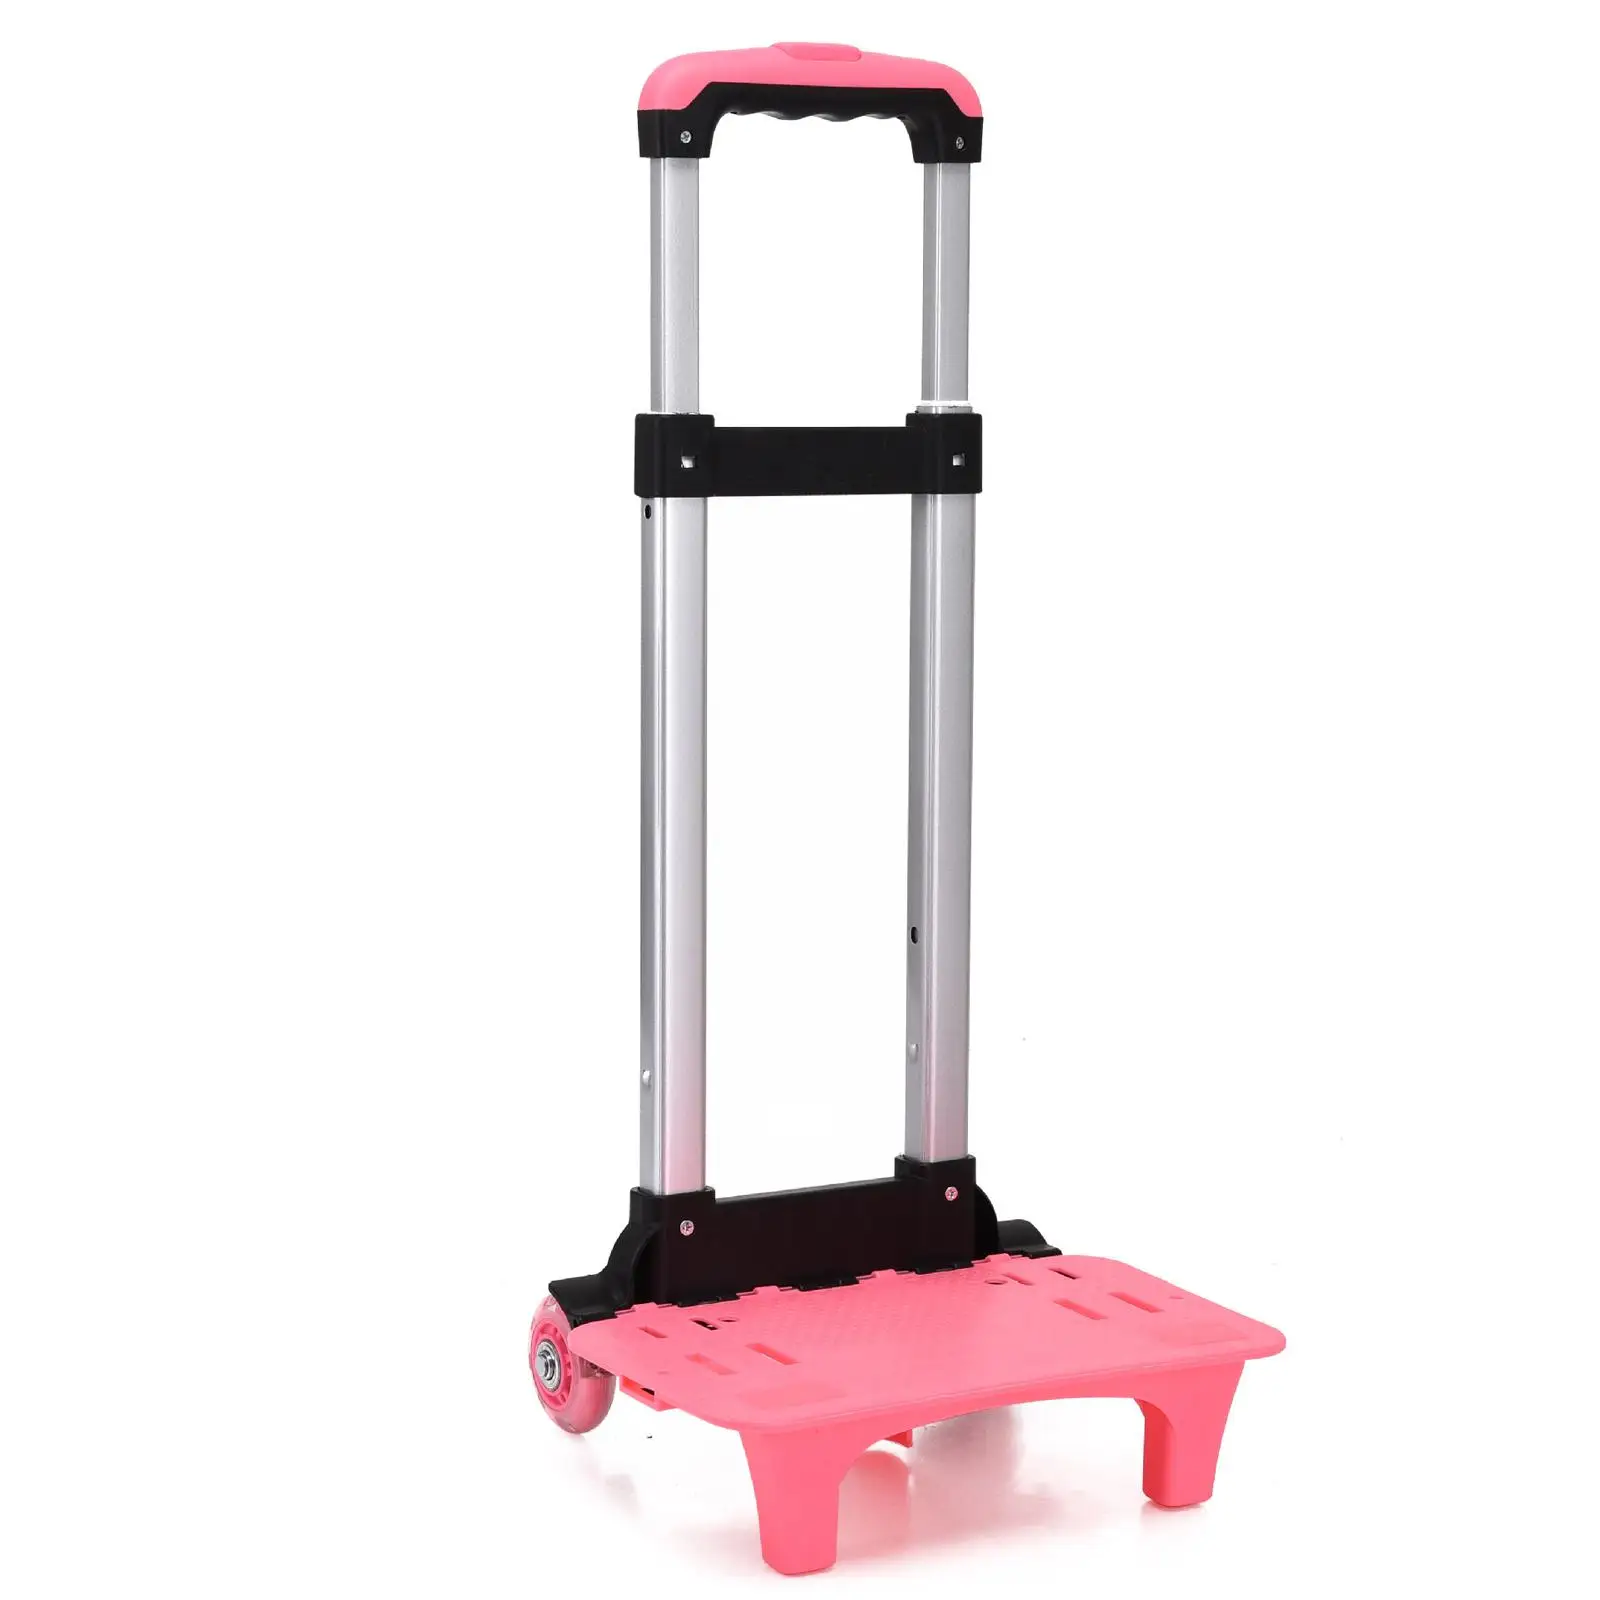 Backpack Hand Truck Backpack Trolley,Aluminum Alloy,Collapsible Telescopic Rod Wheeled Cart Wheeled Hand Trolley for Children